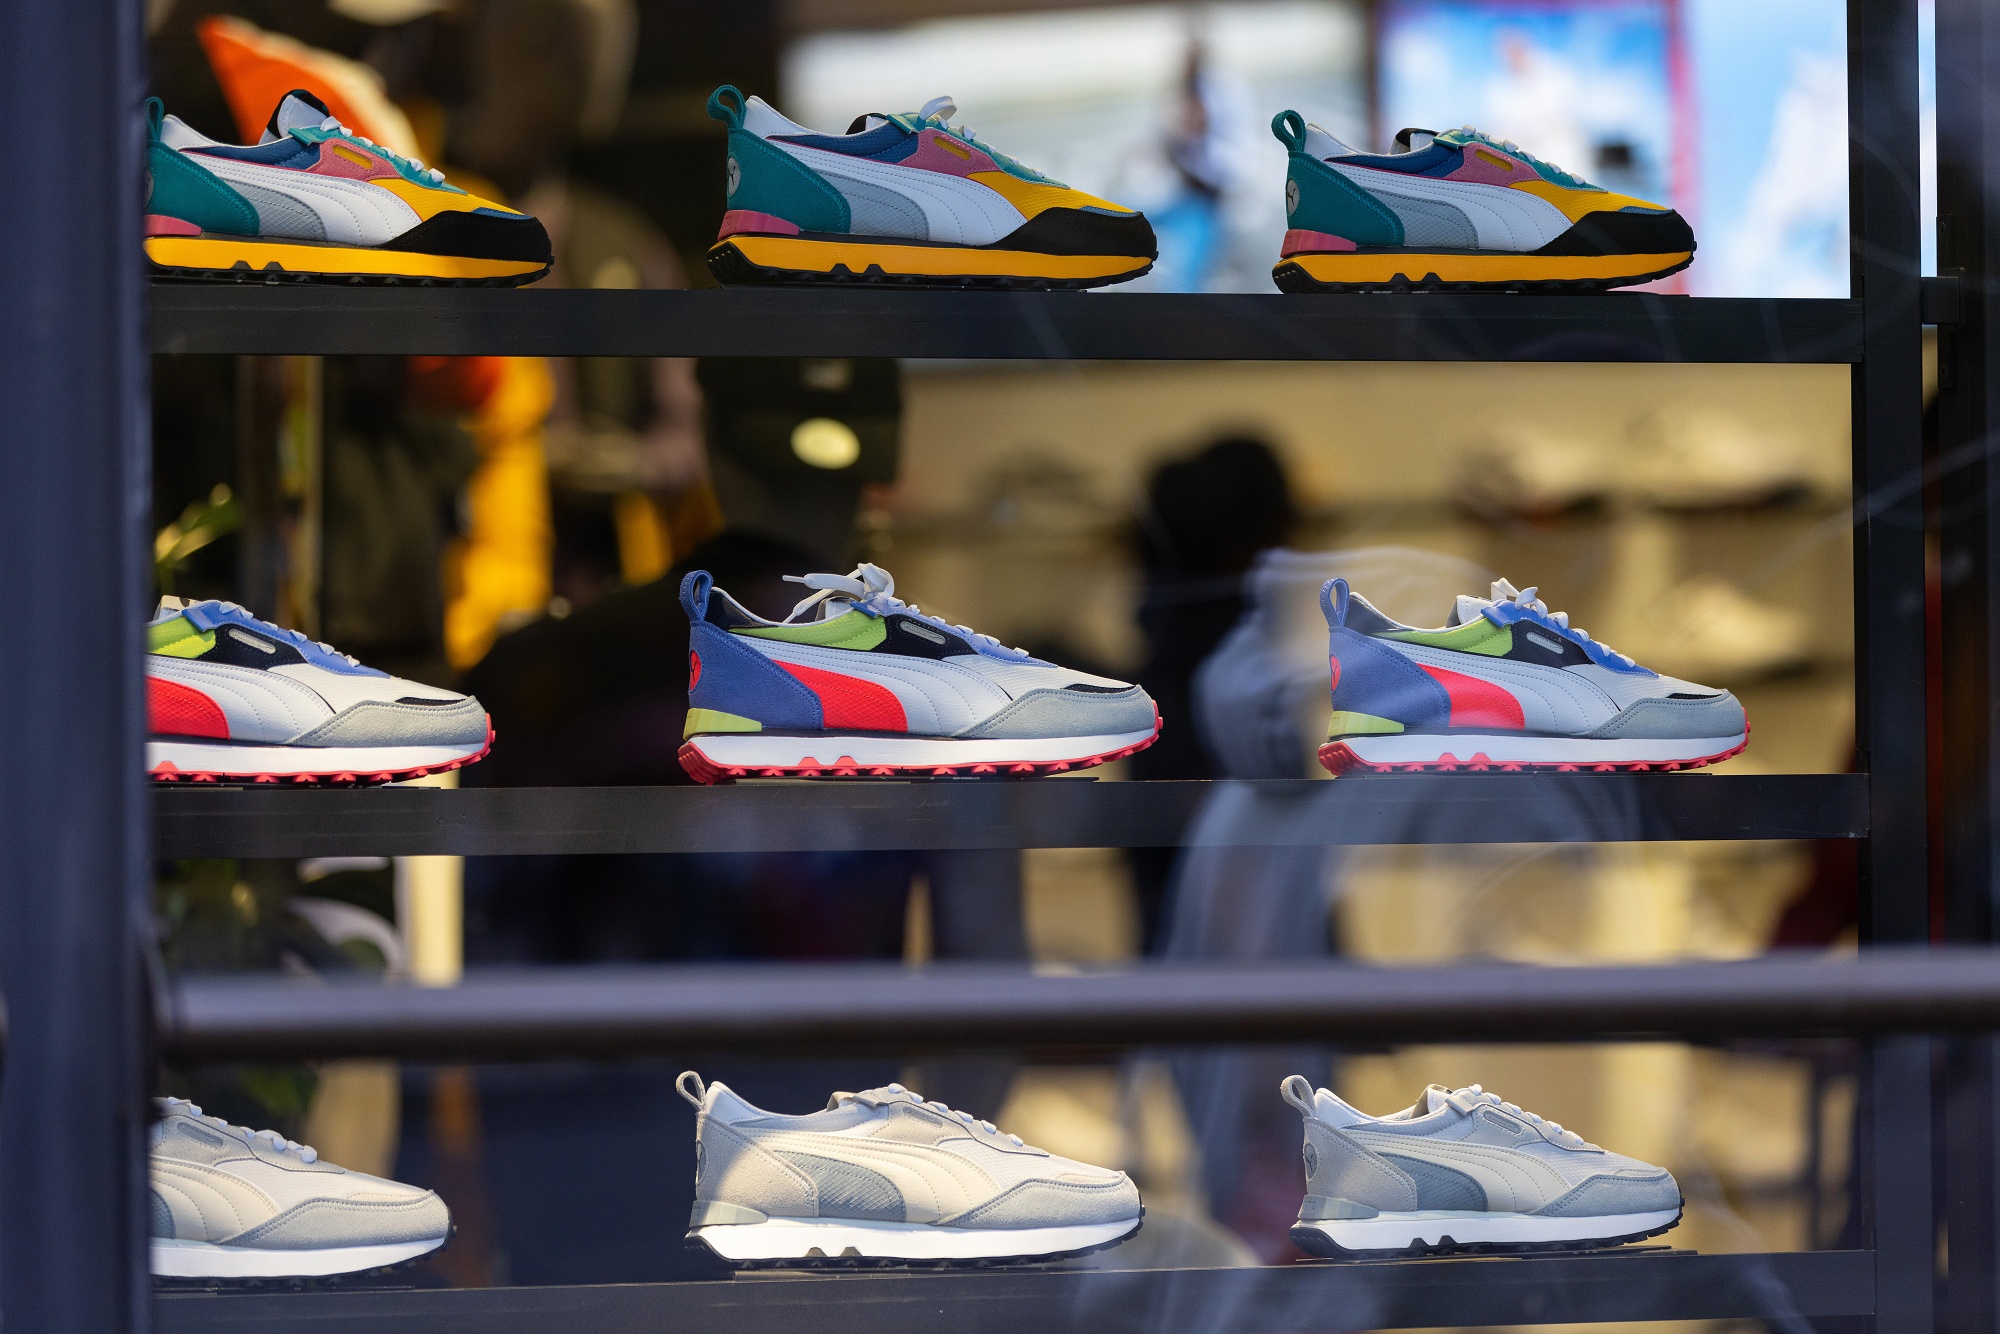 Puma Stock Falls Most in Years After Call - Bloomberg